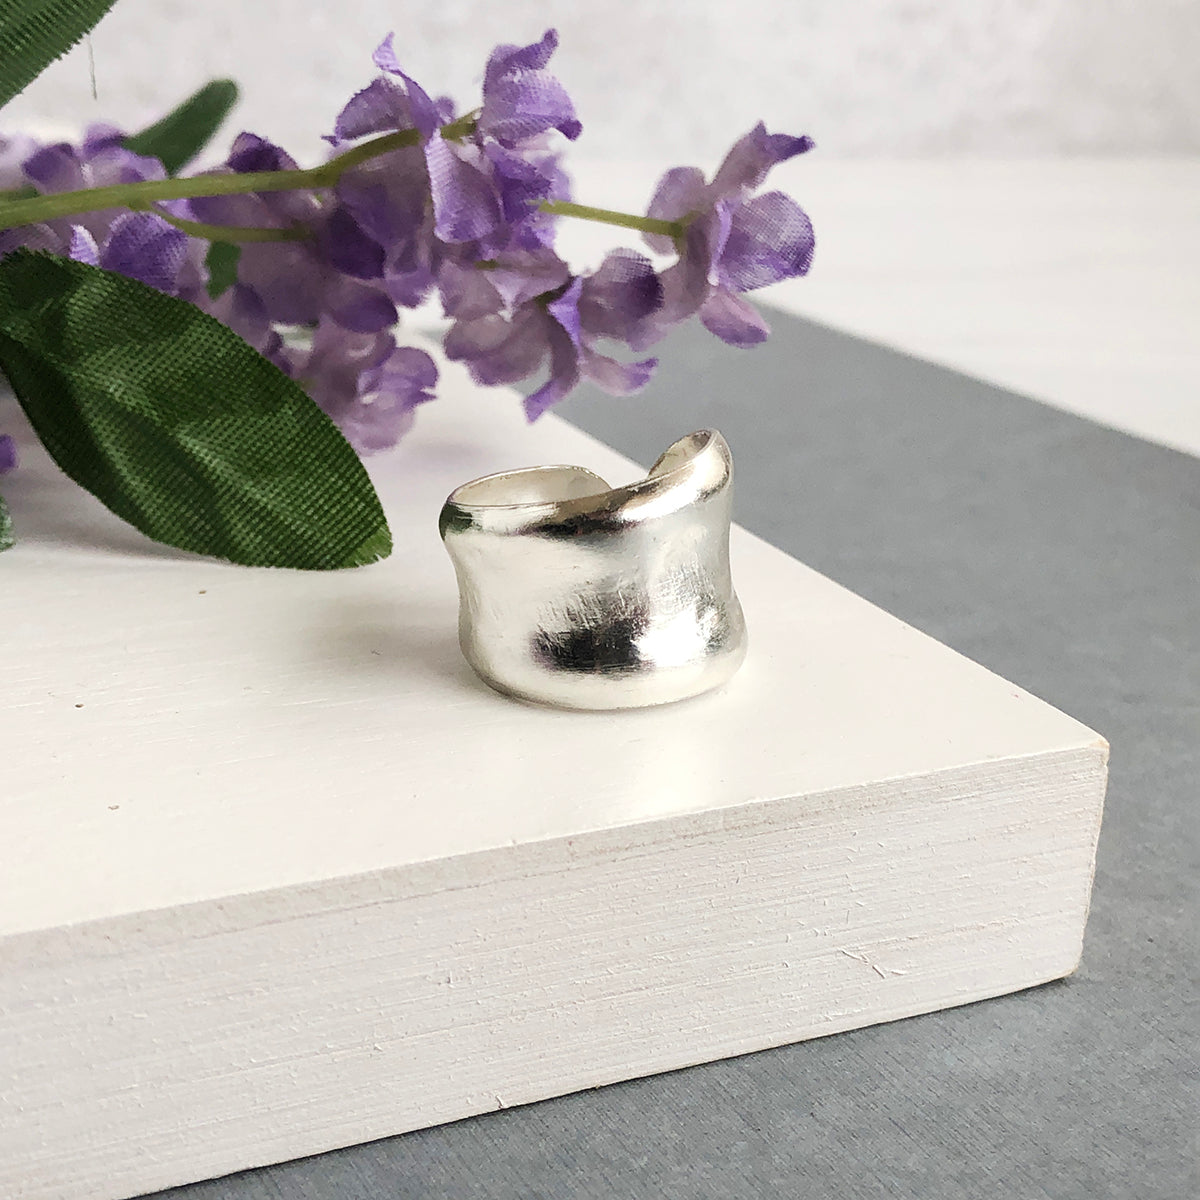 Load image into Gallery viewer, Sculptural Wrap Ring
